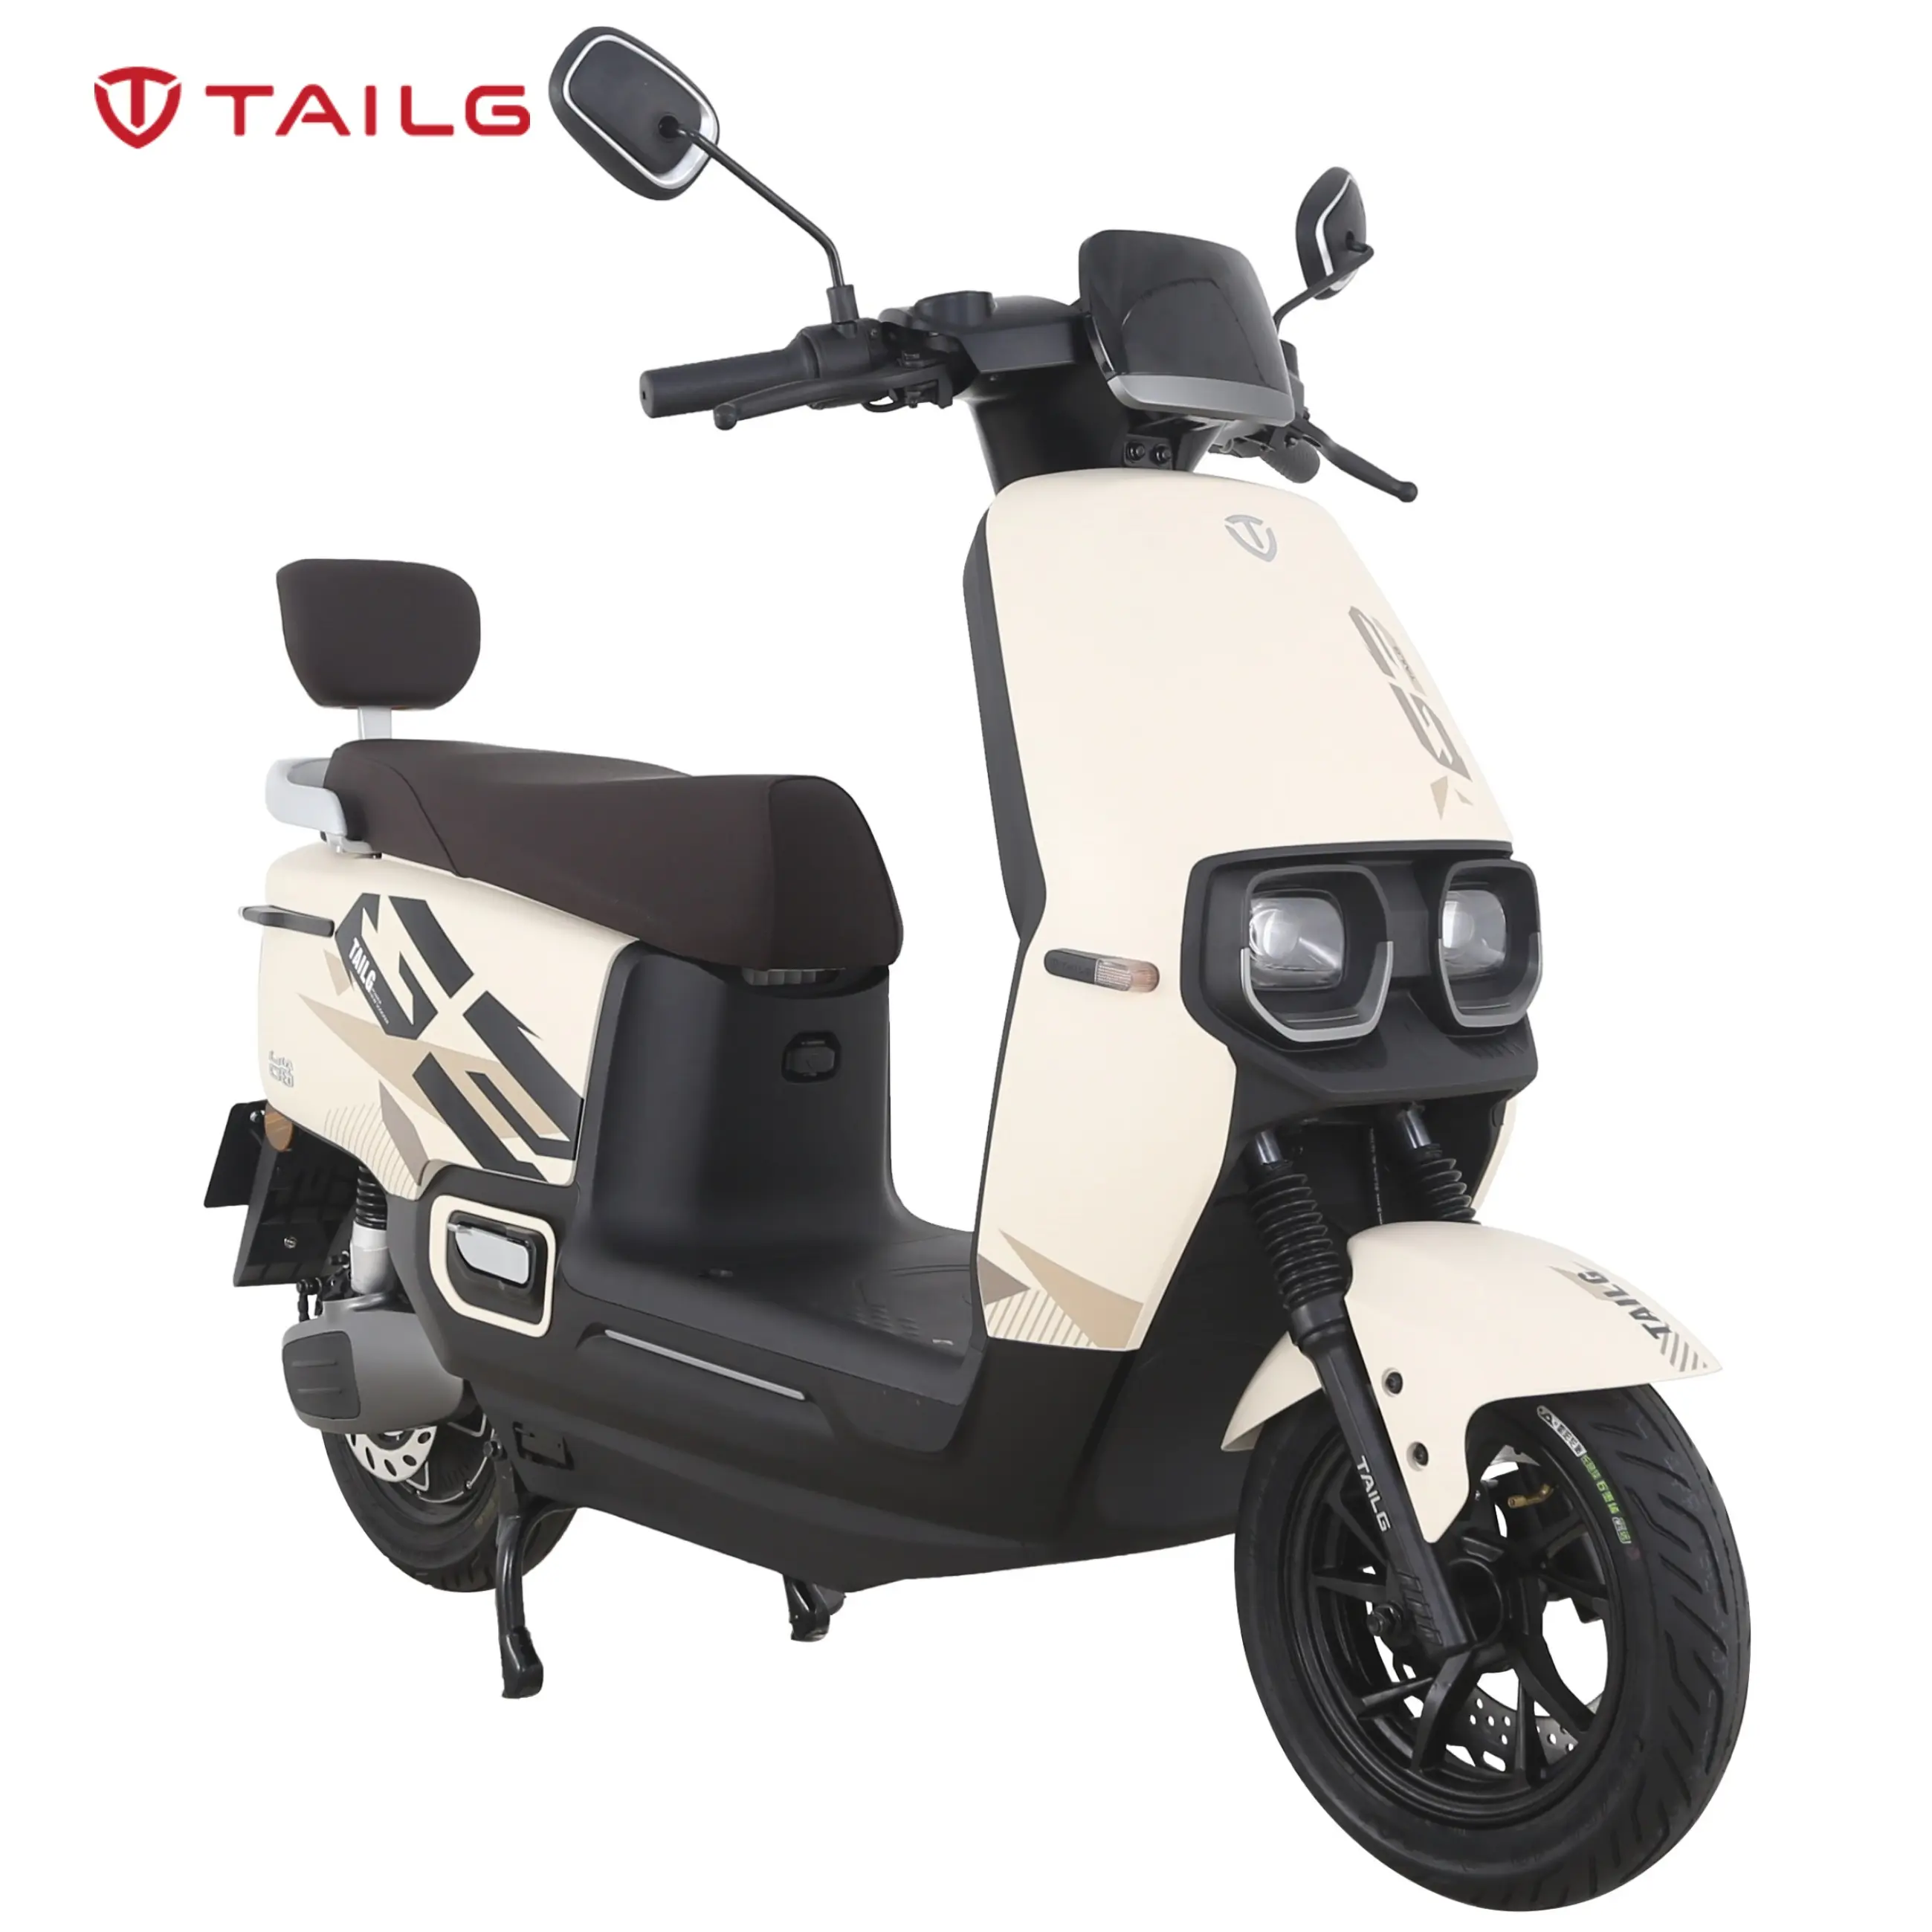 Tailg Good Quality Adult Motorbikes Euro 1500W 150CC 125CC 250CC Cover Pattern Electric Motorcycle